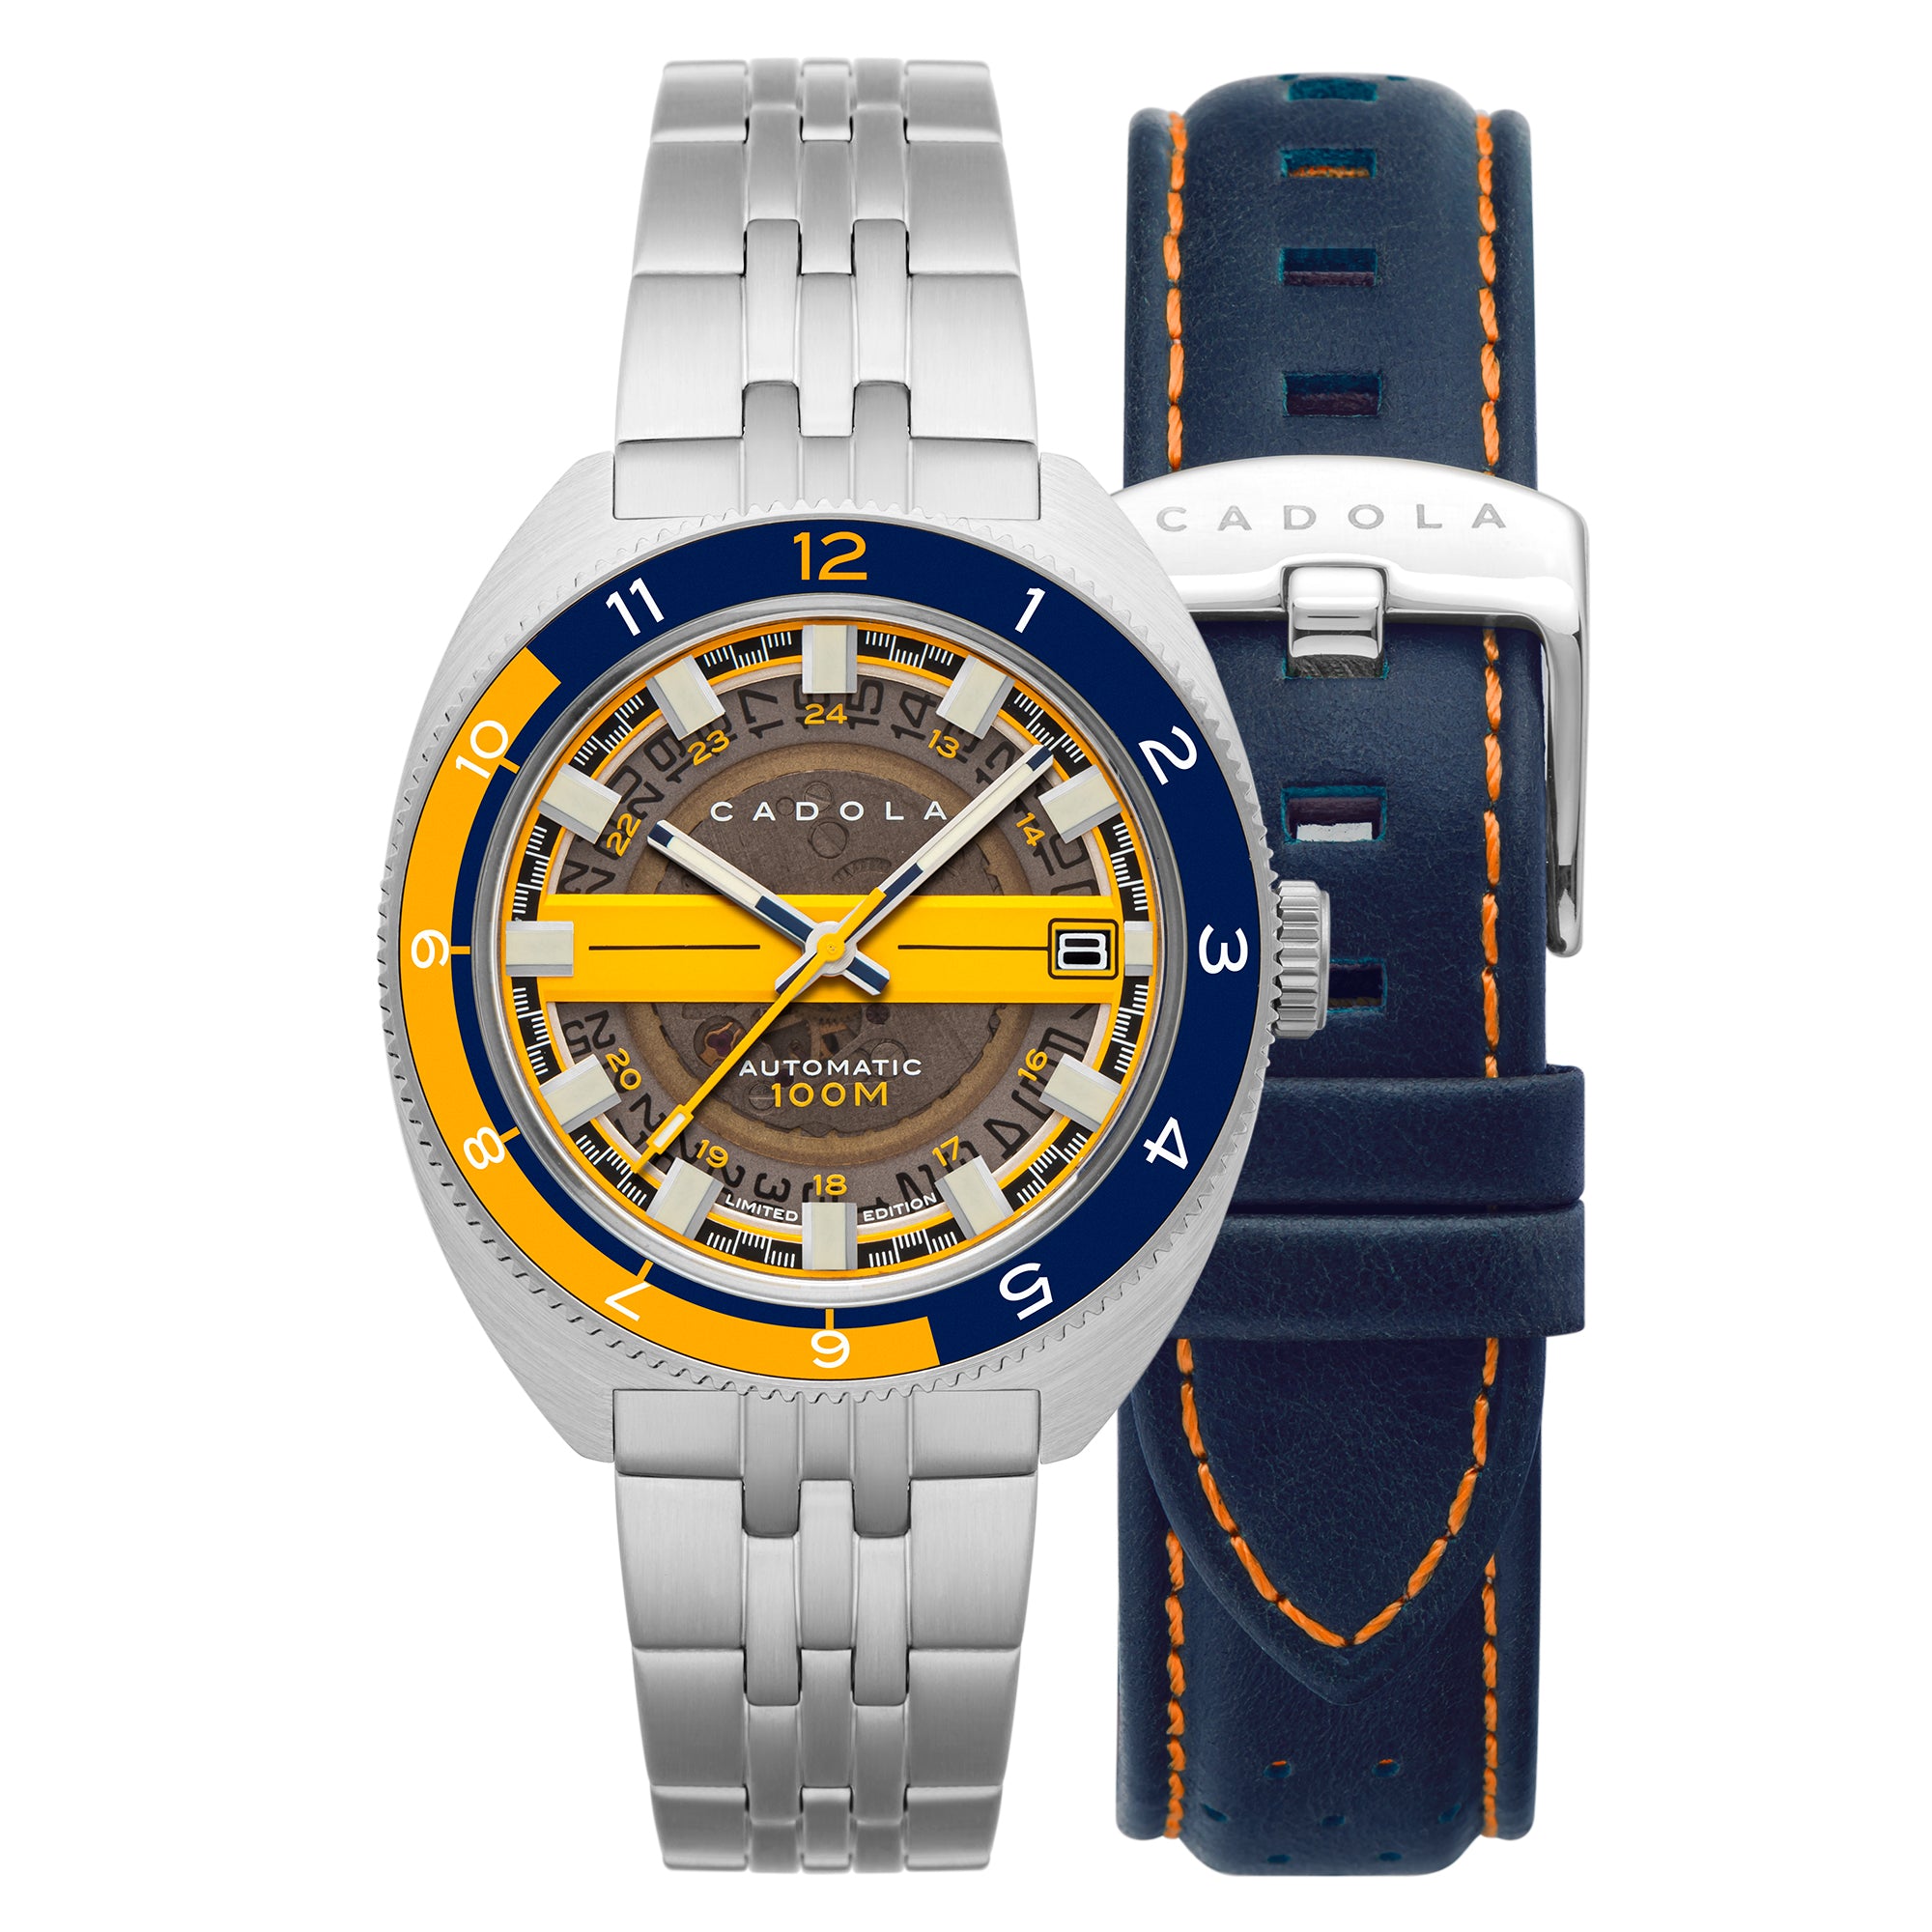 CADOLA Cadola 1977 Automatic Limited Edition Men's Automatic Skeleton Pennant Blue Watch CD-1024-22